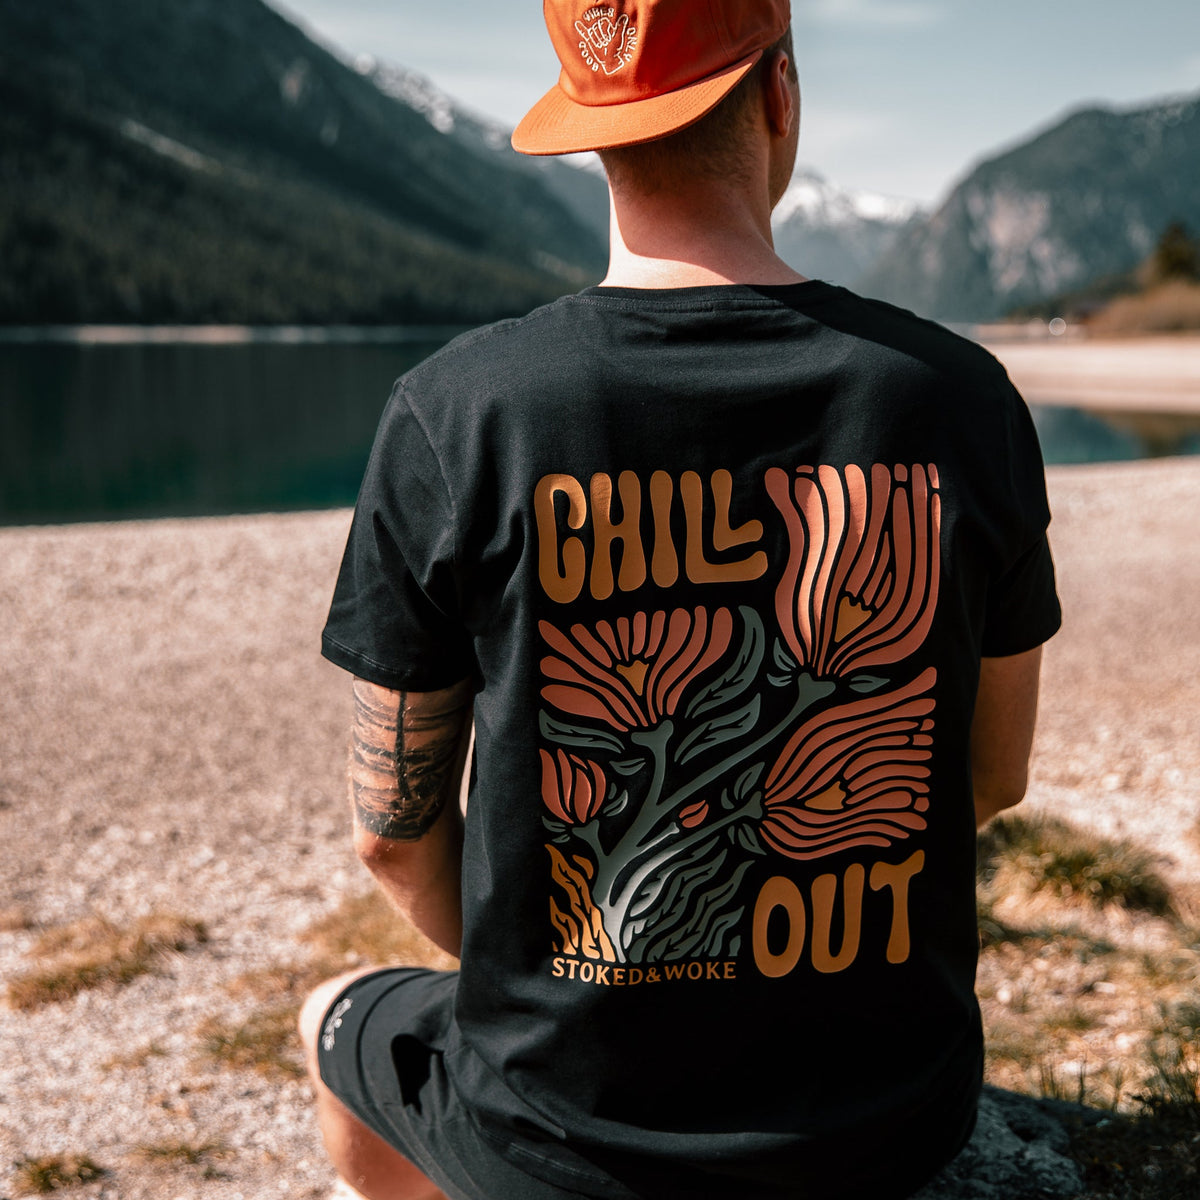 Organic "Chill Out" Tee - Stoked&Woke Clothing